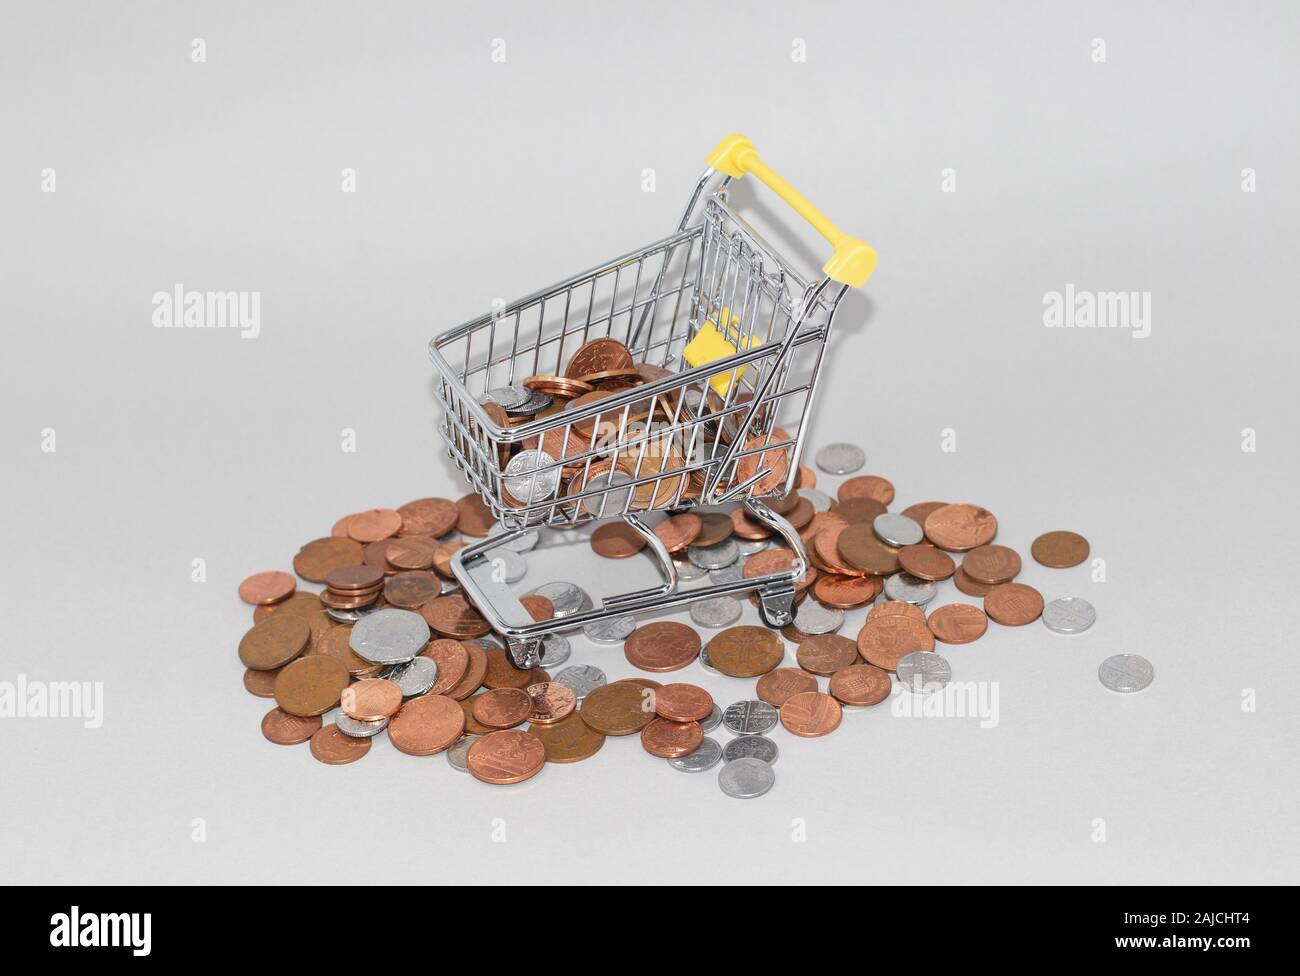 Shopping trolley cart surrounded by loose change, british penny coins. Overspending and cost of living concept Stock Photo